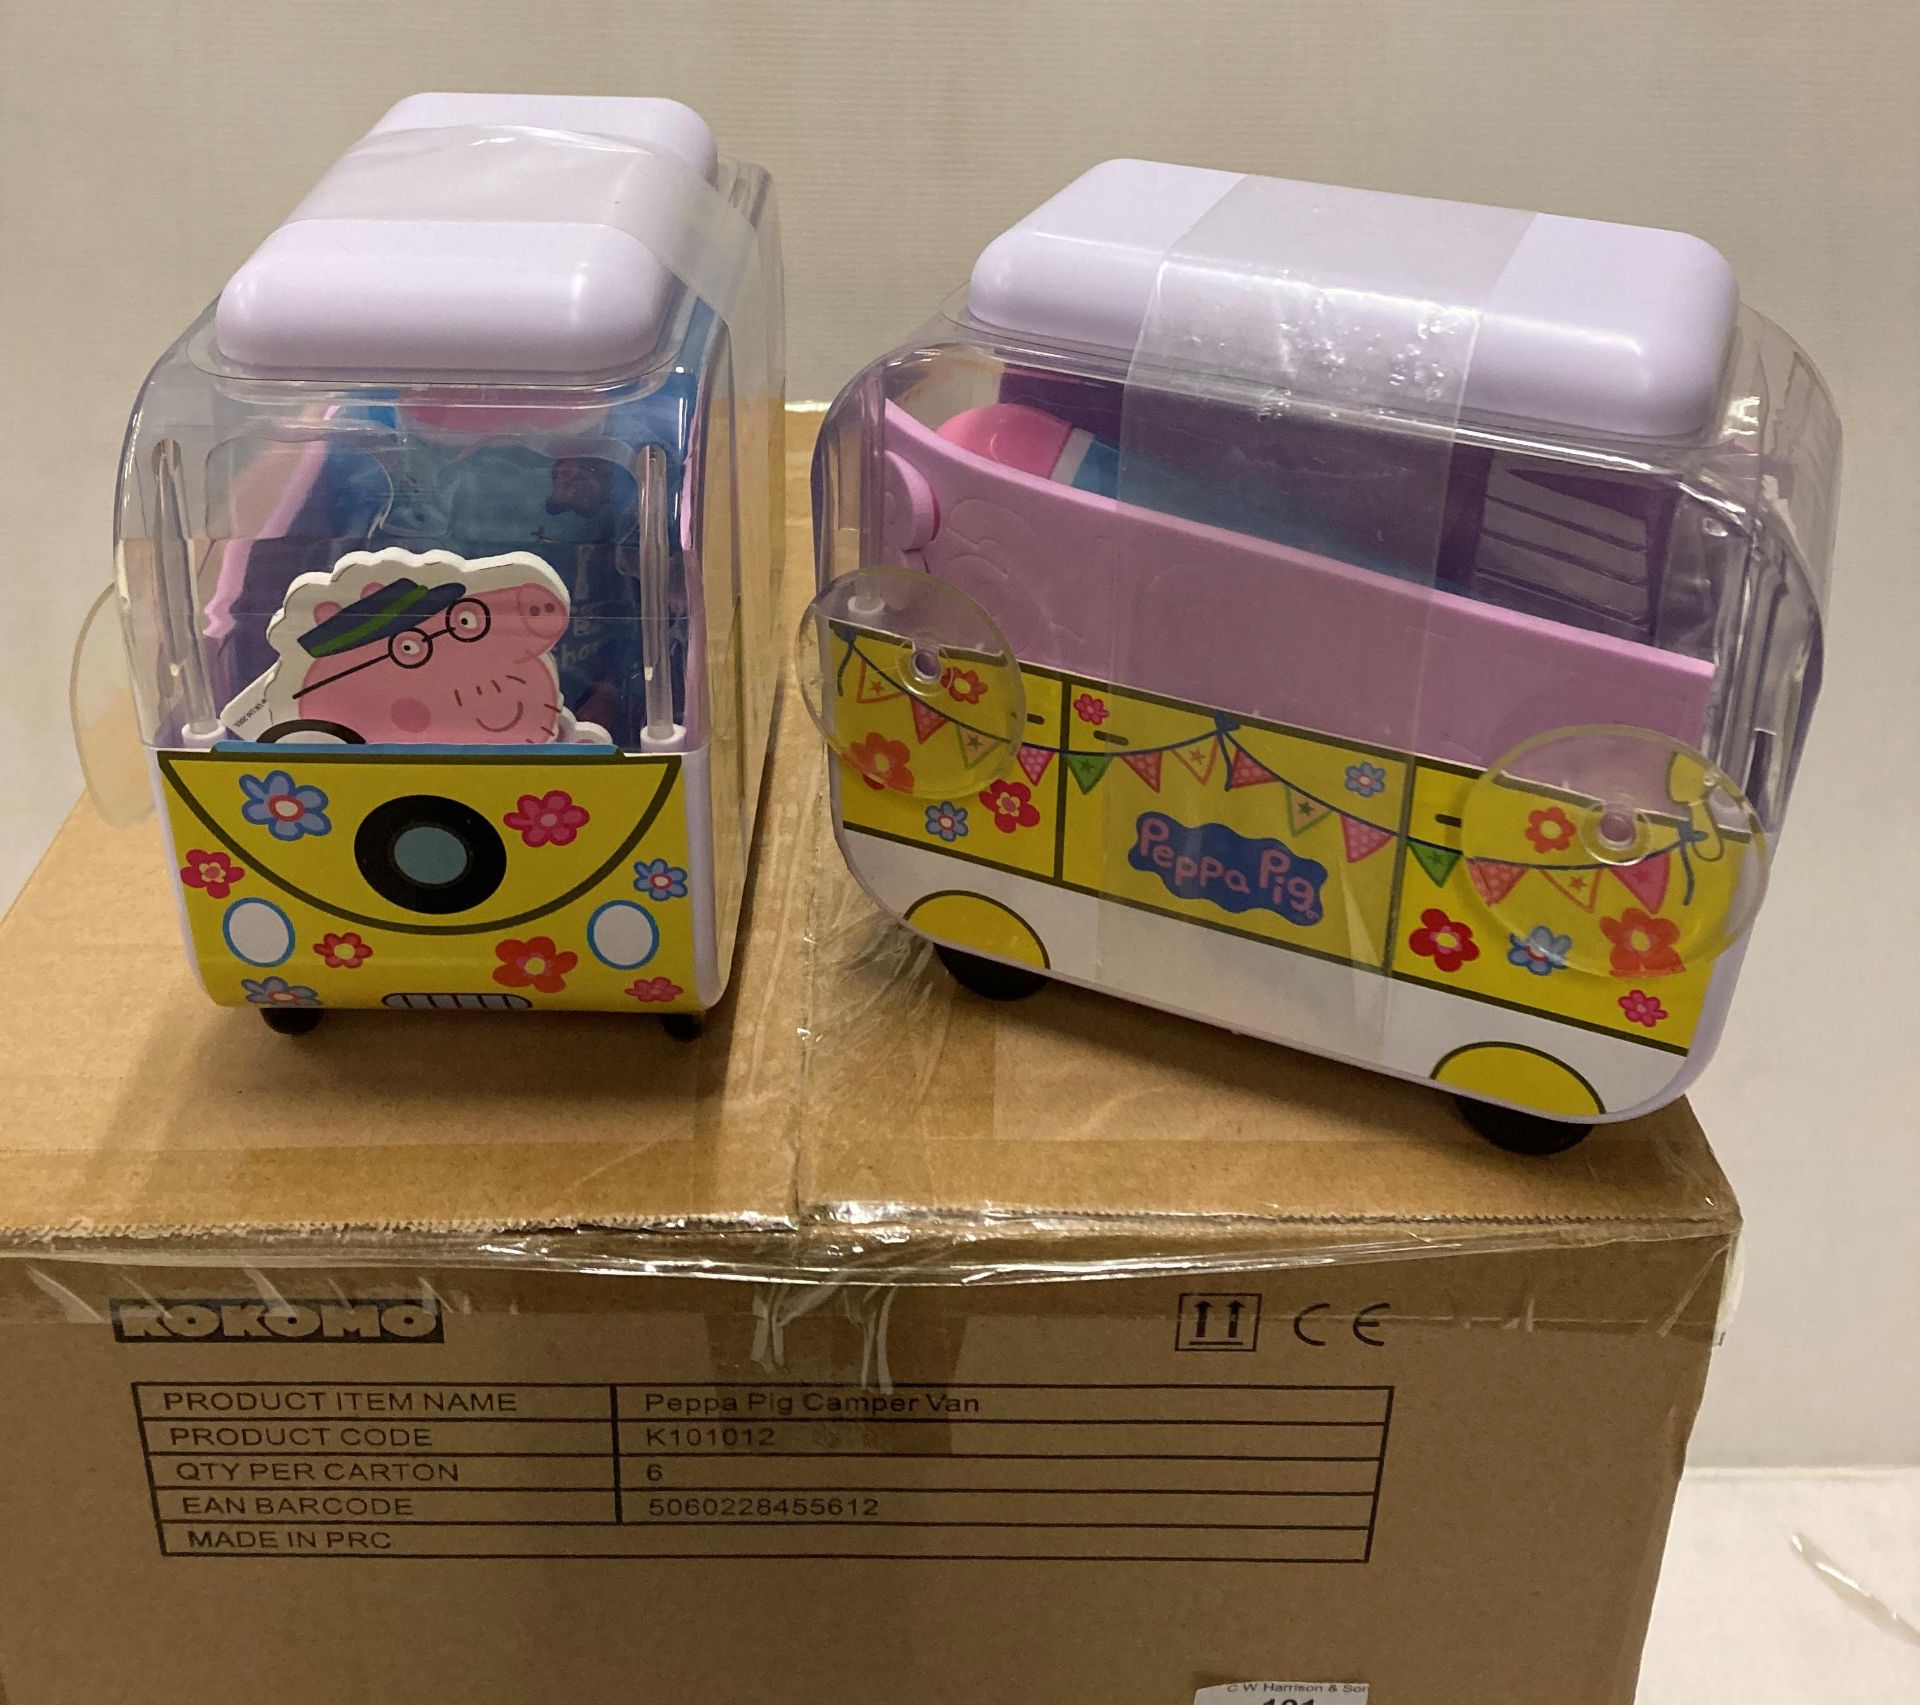 18 x Peppa Pig Campervan Bath Sets (with cut-out Peppa Pig characters, bath numbers, - Image 2 of 3